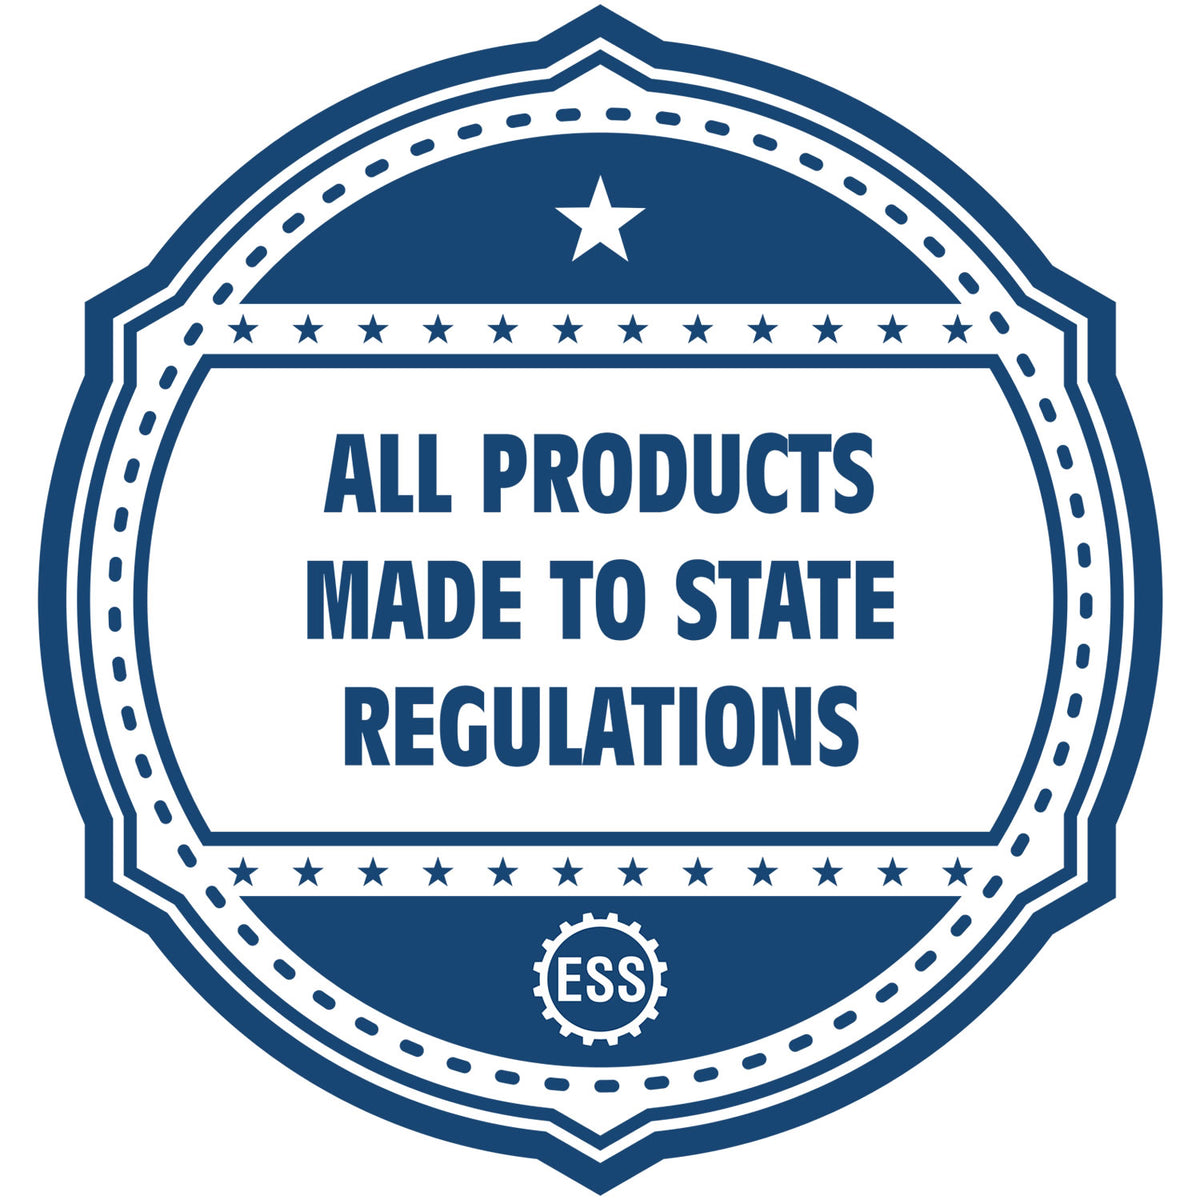 An icon or badge element for the Long Reach Georgia PE Seal showing that this product is made in compliance with state regulations.